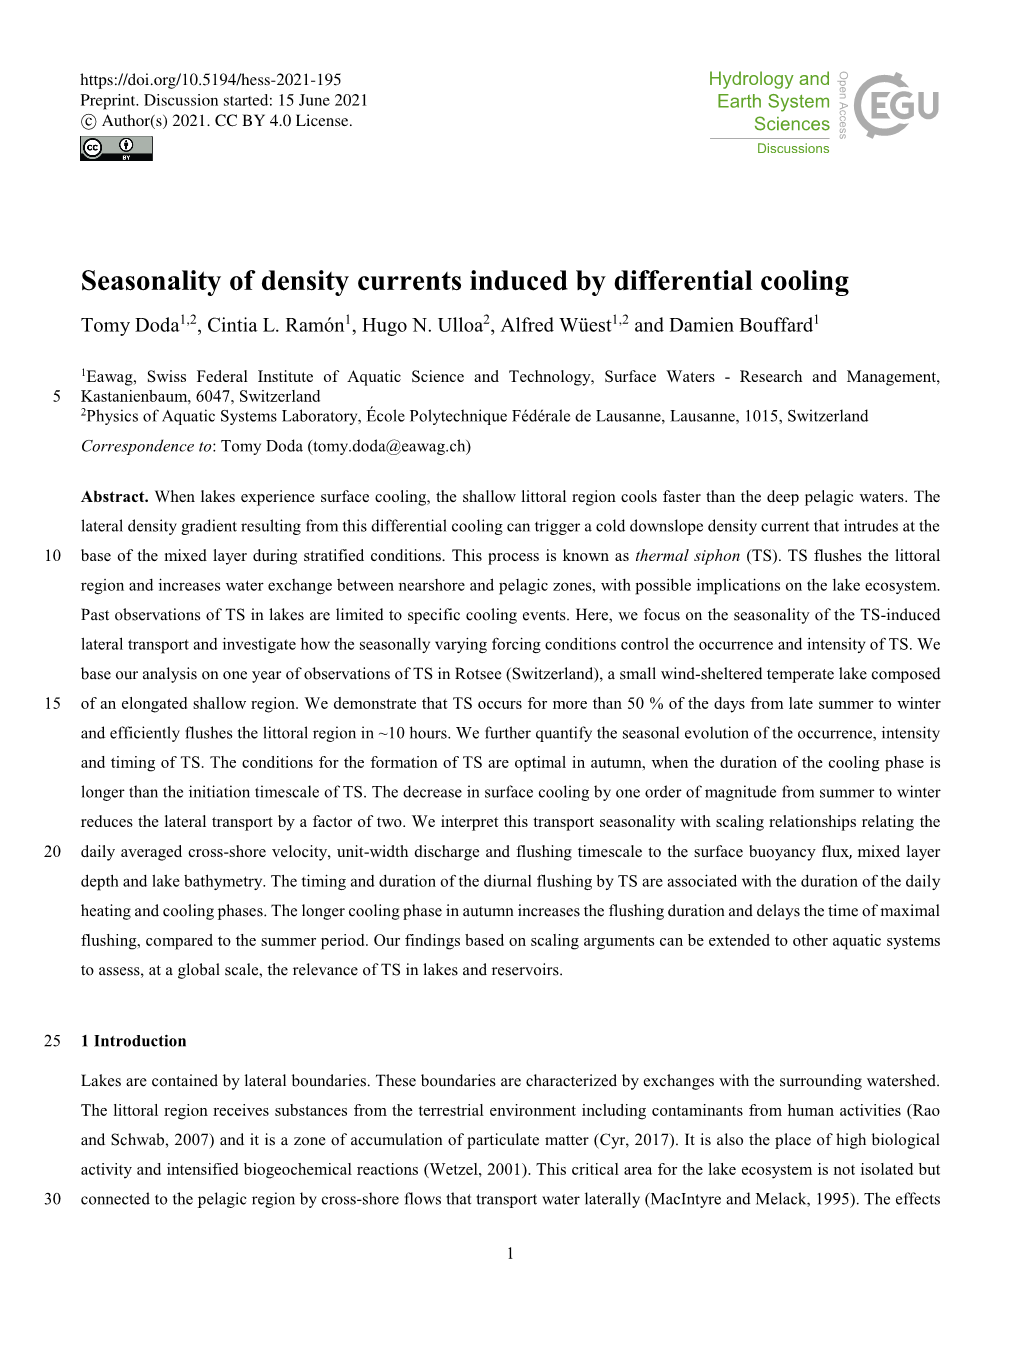 Seasonality of Density Currents Induced by Differential Cooling Tomy Doda1,2, Cintia L